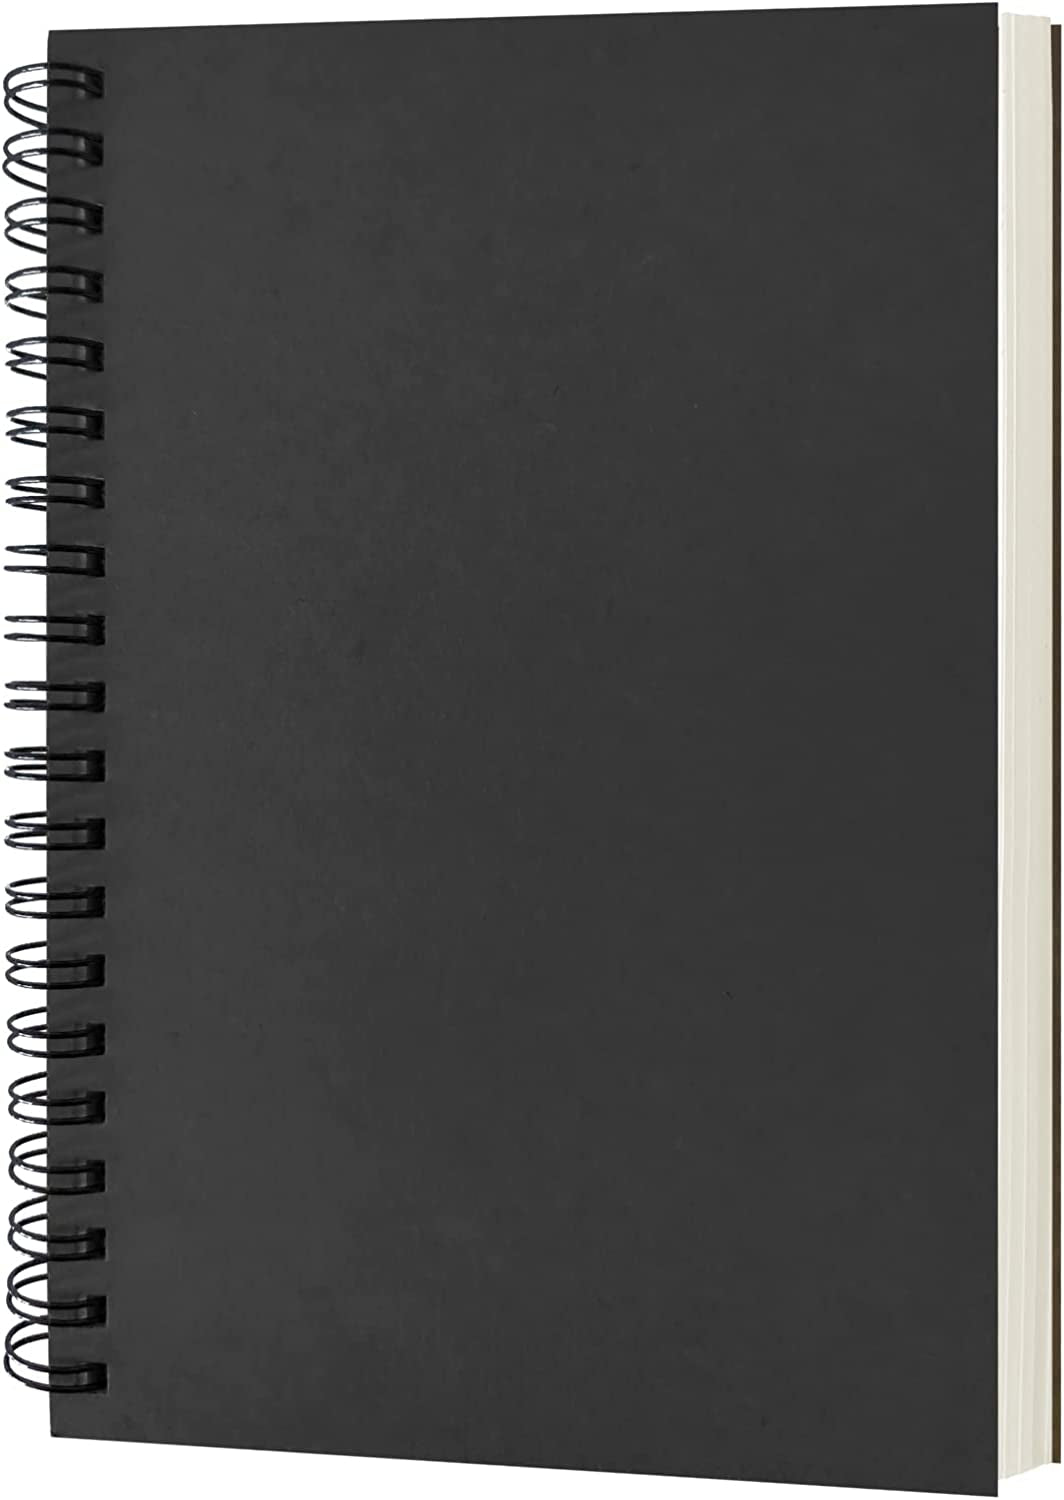 Blank Spiral Notebook, 1-Pack, Soft Cover, Sketch Book, 100 Pages / 50 Sheets, 7.5 Inch X 5.1 Inch (Black)